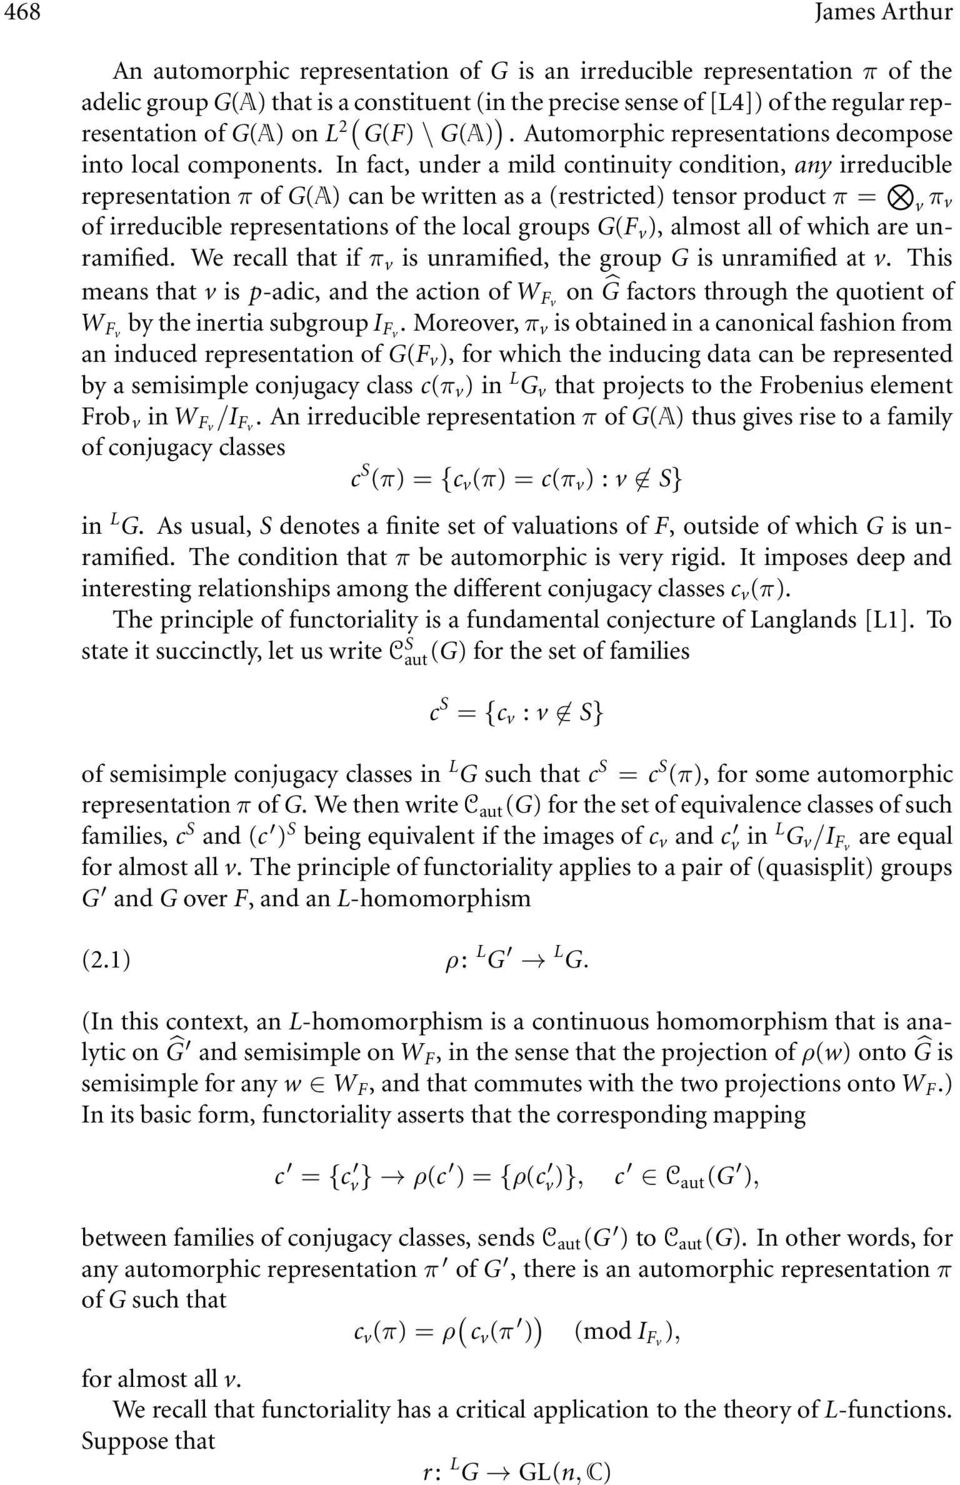 In fact, under a mild continuity condition, any irreducible representation π of G(A) can be written as a (restricted) tensor product π = v π v of irreducible representations of the local groups G(F v